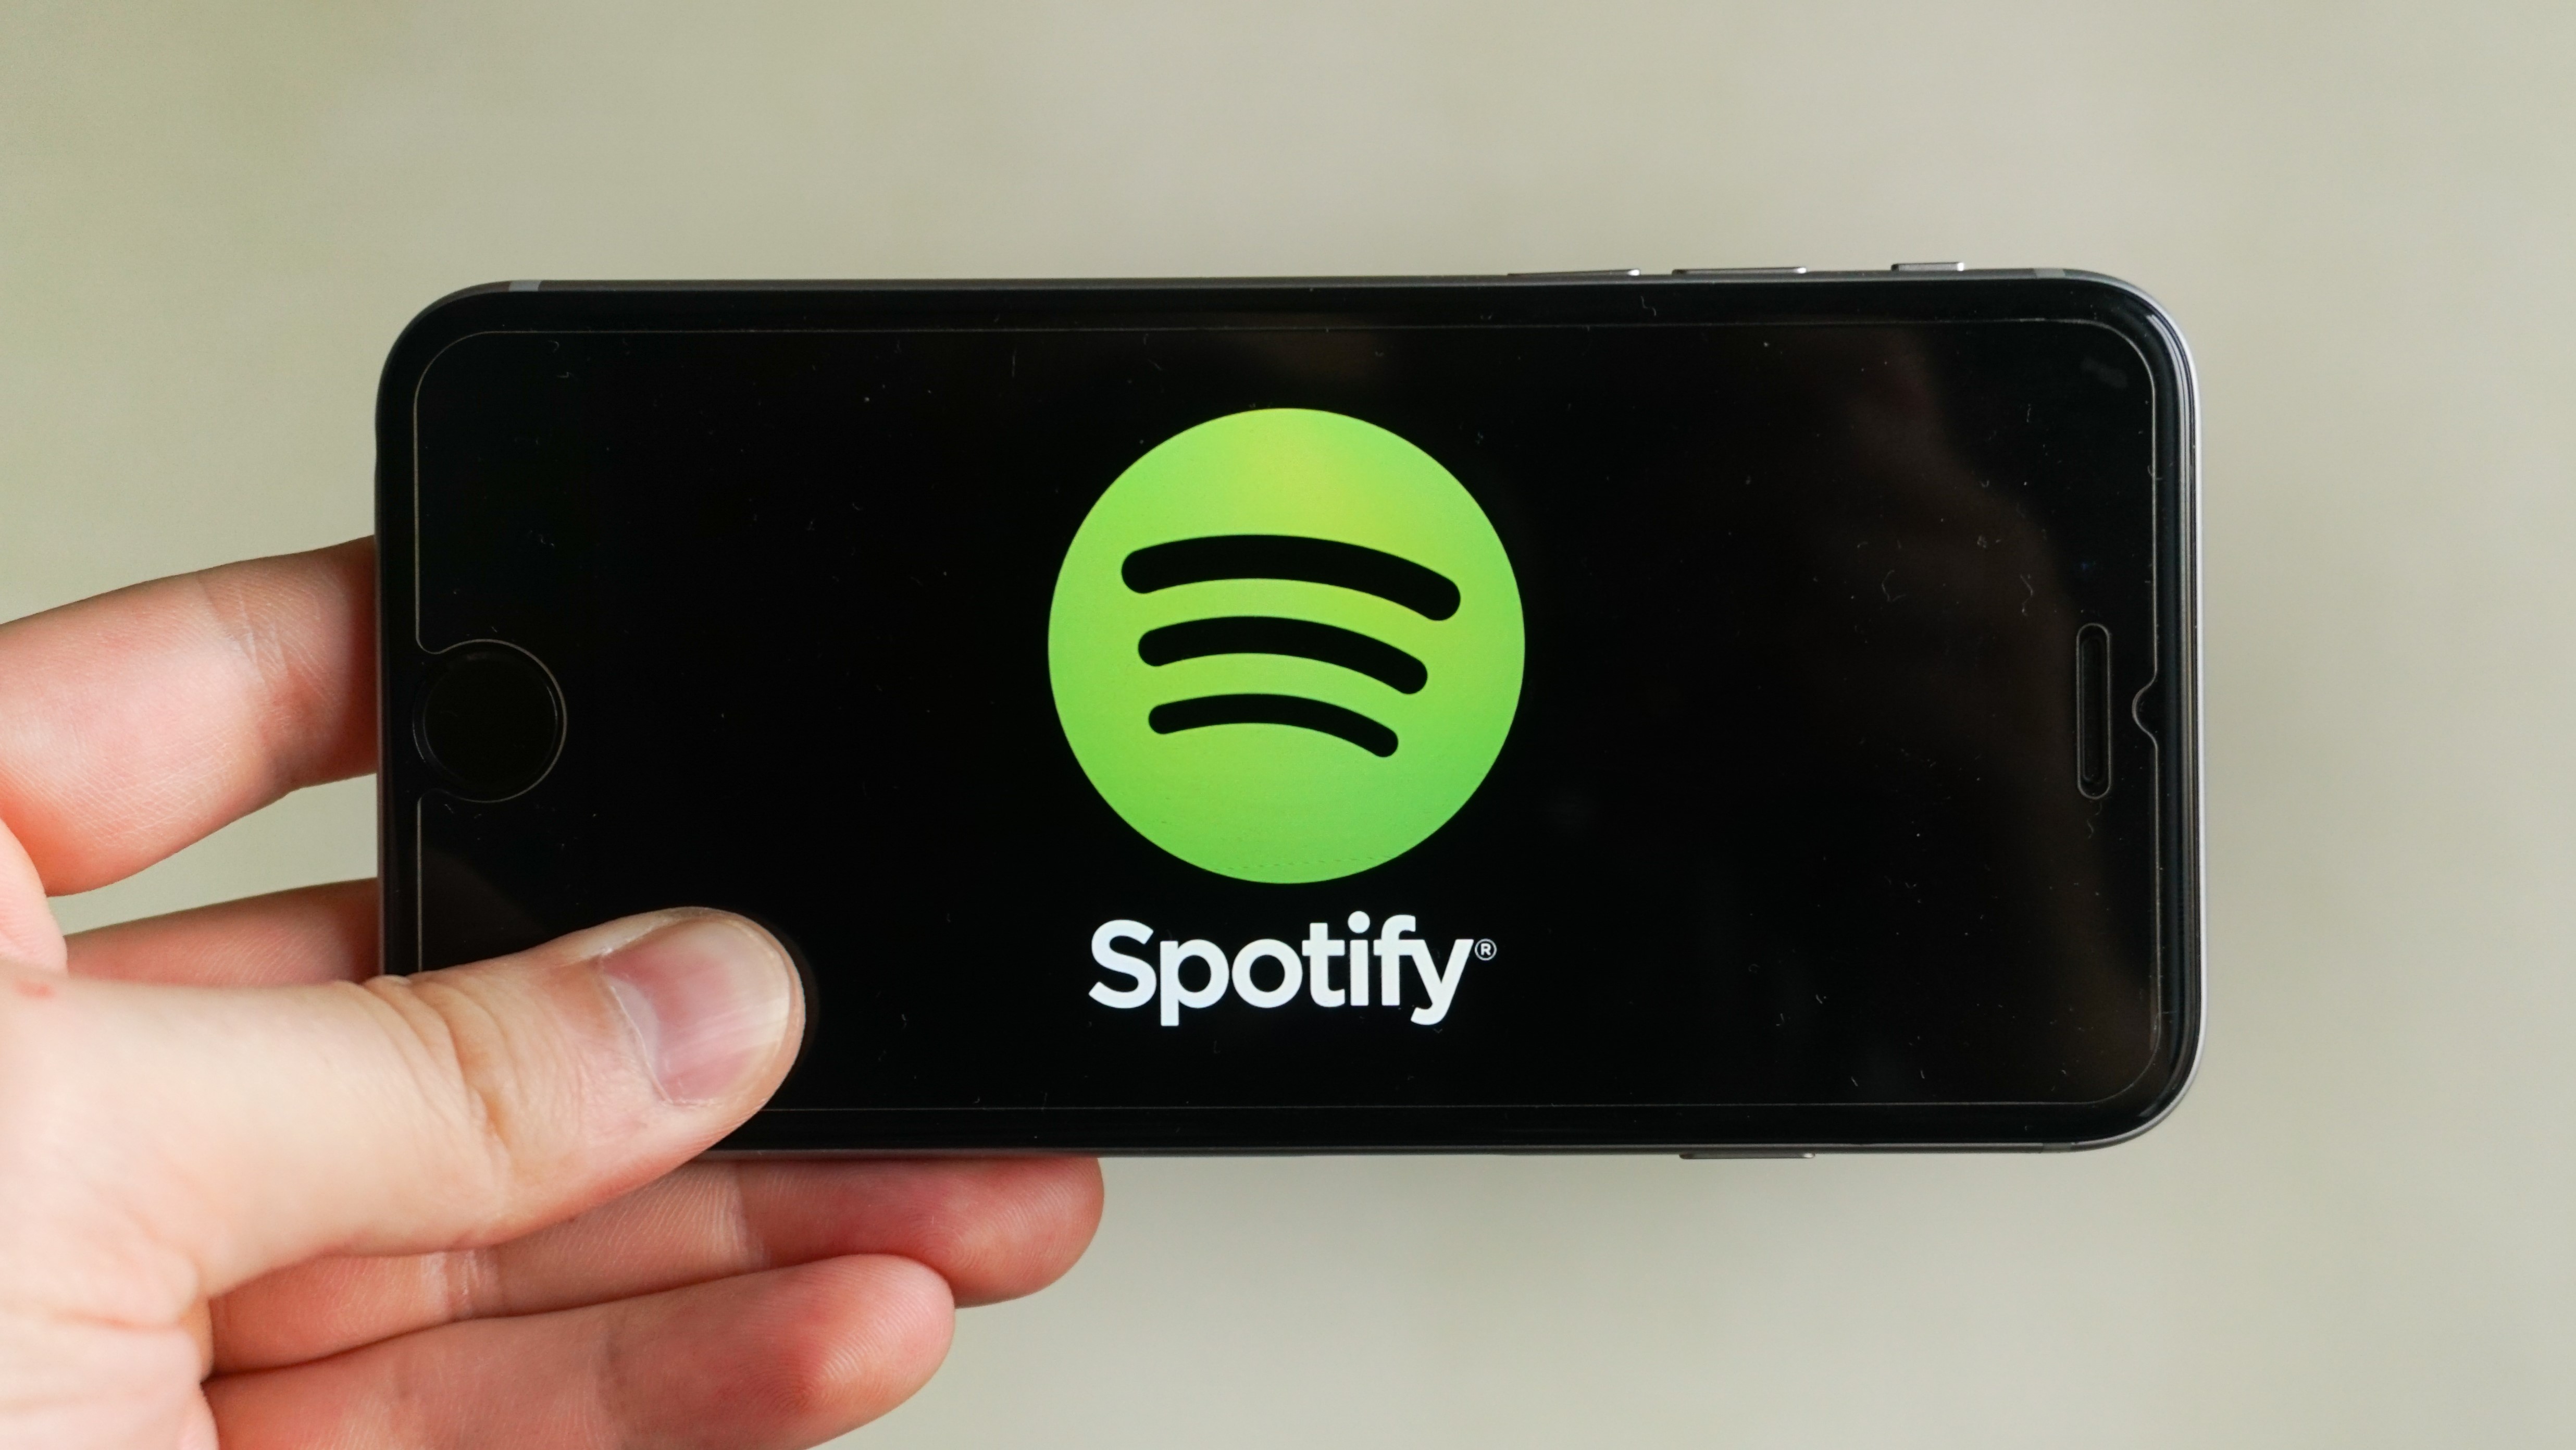 spotify student premium includes hulu and showtime